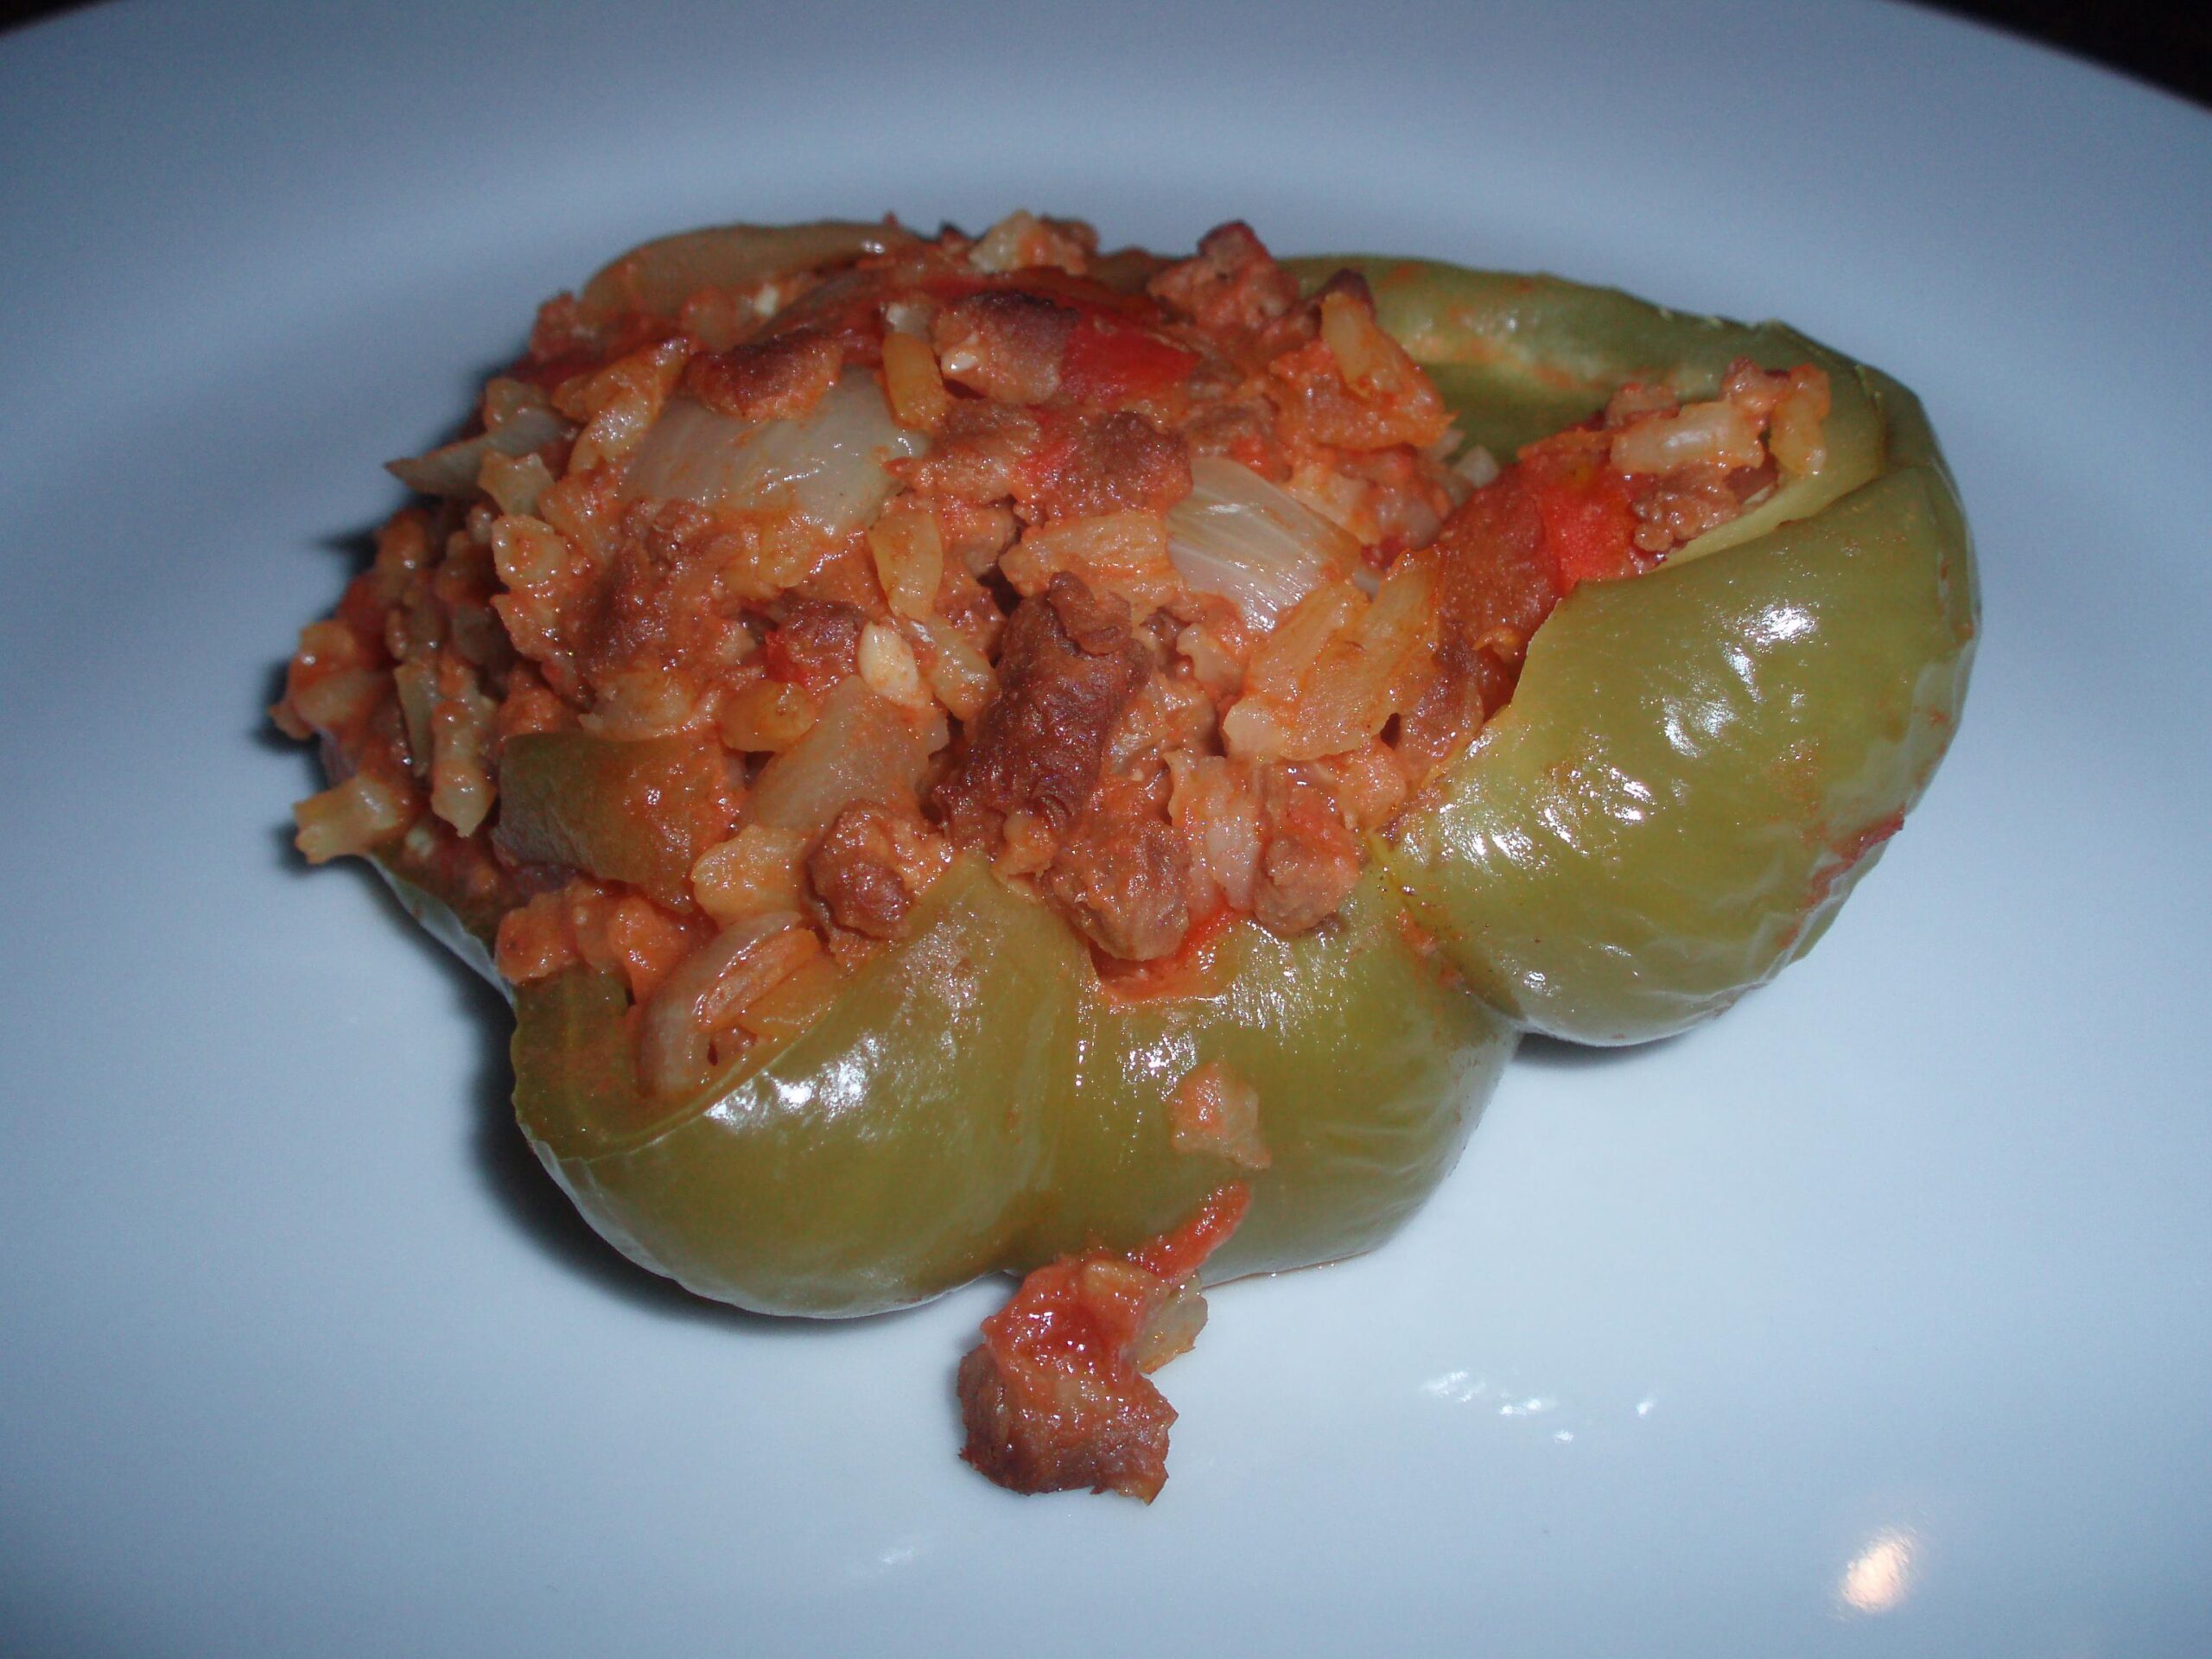  A medley of tender and juicy bell peppers, stuffed with vegan goodness